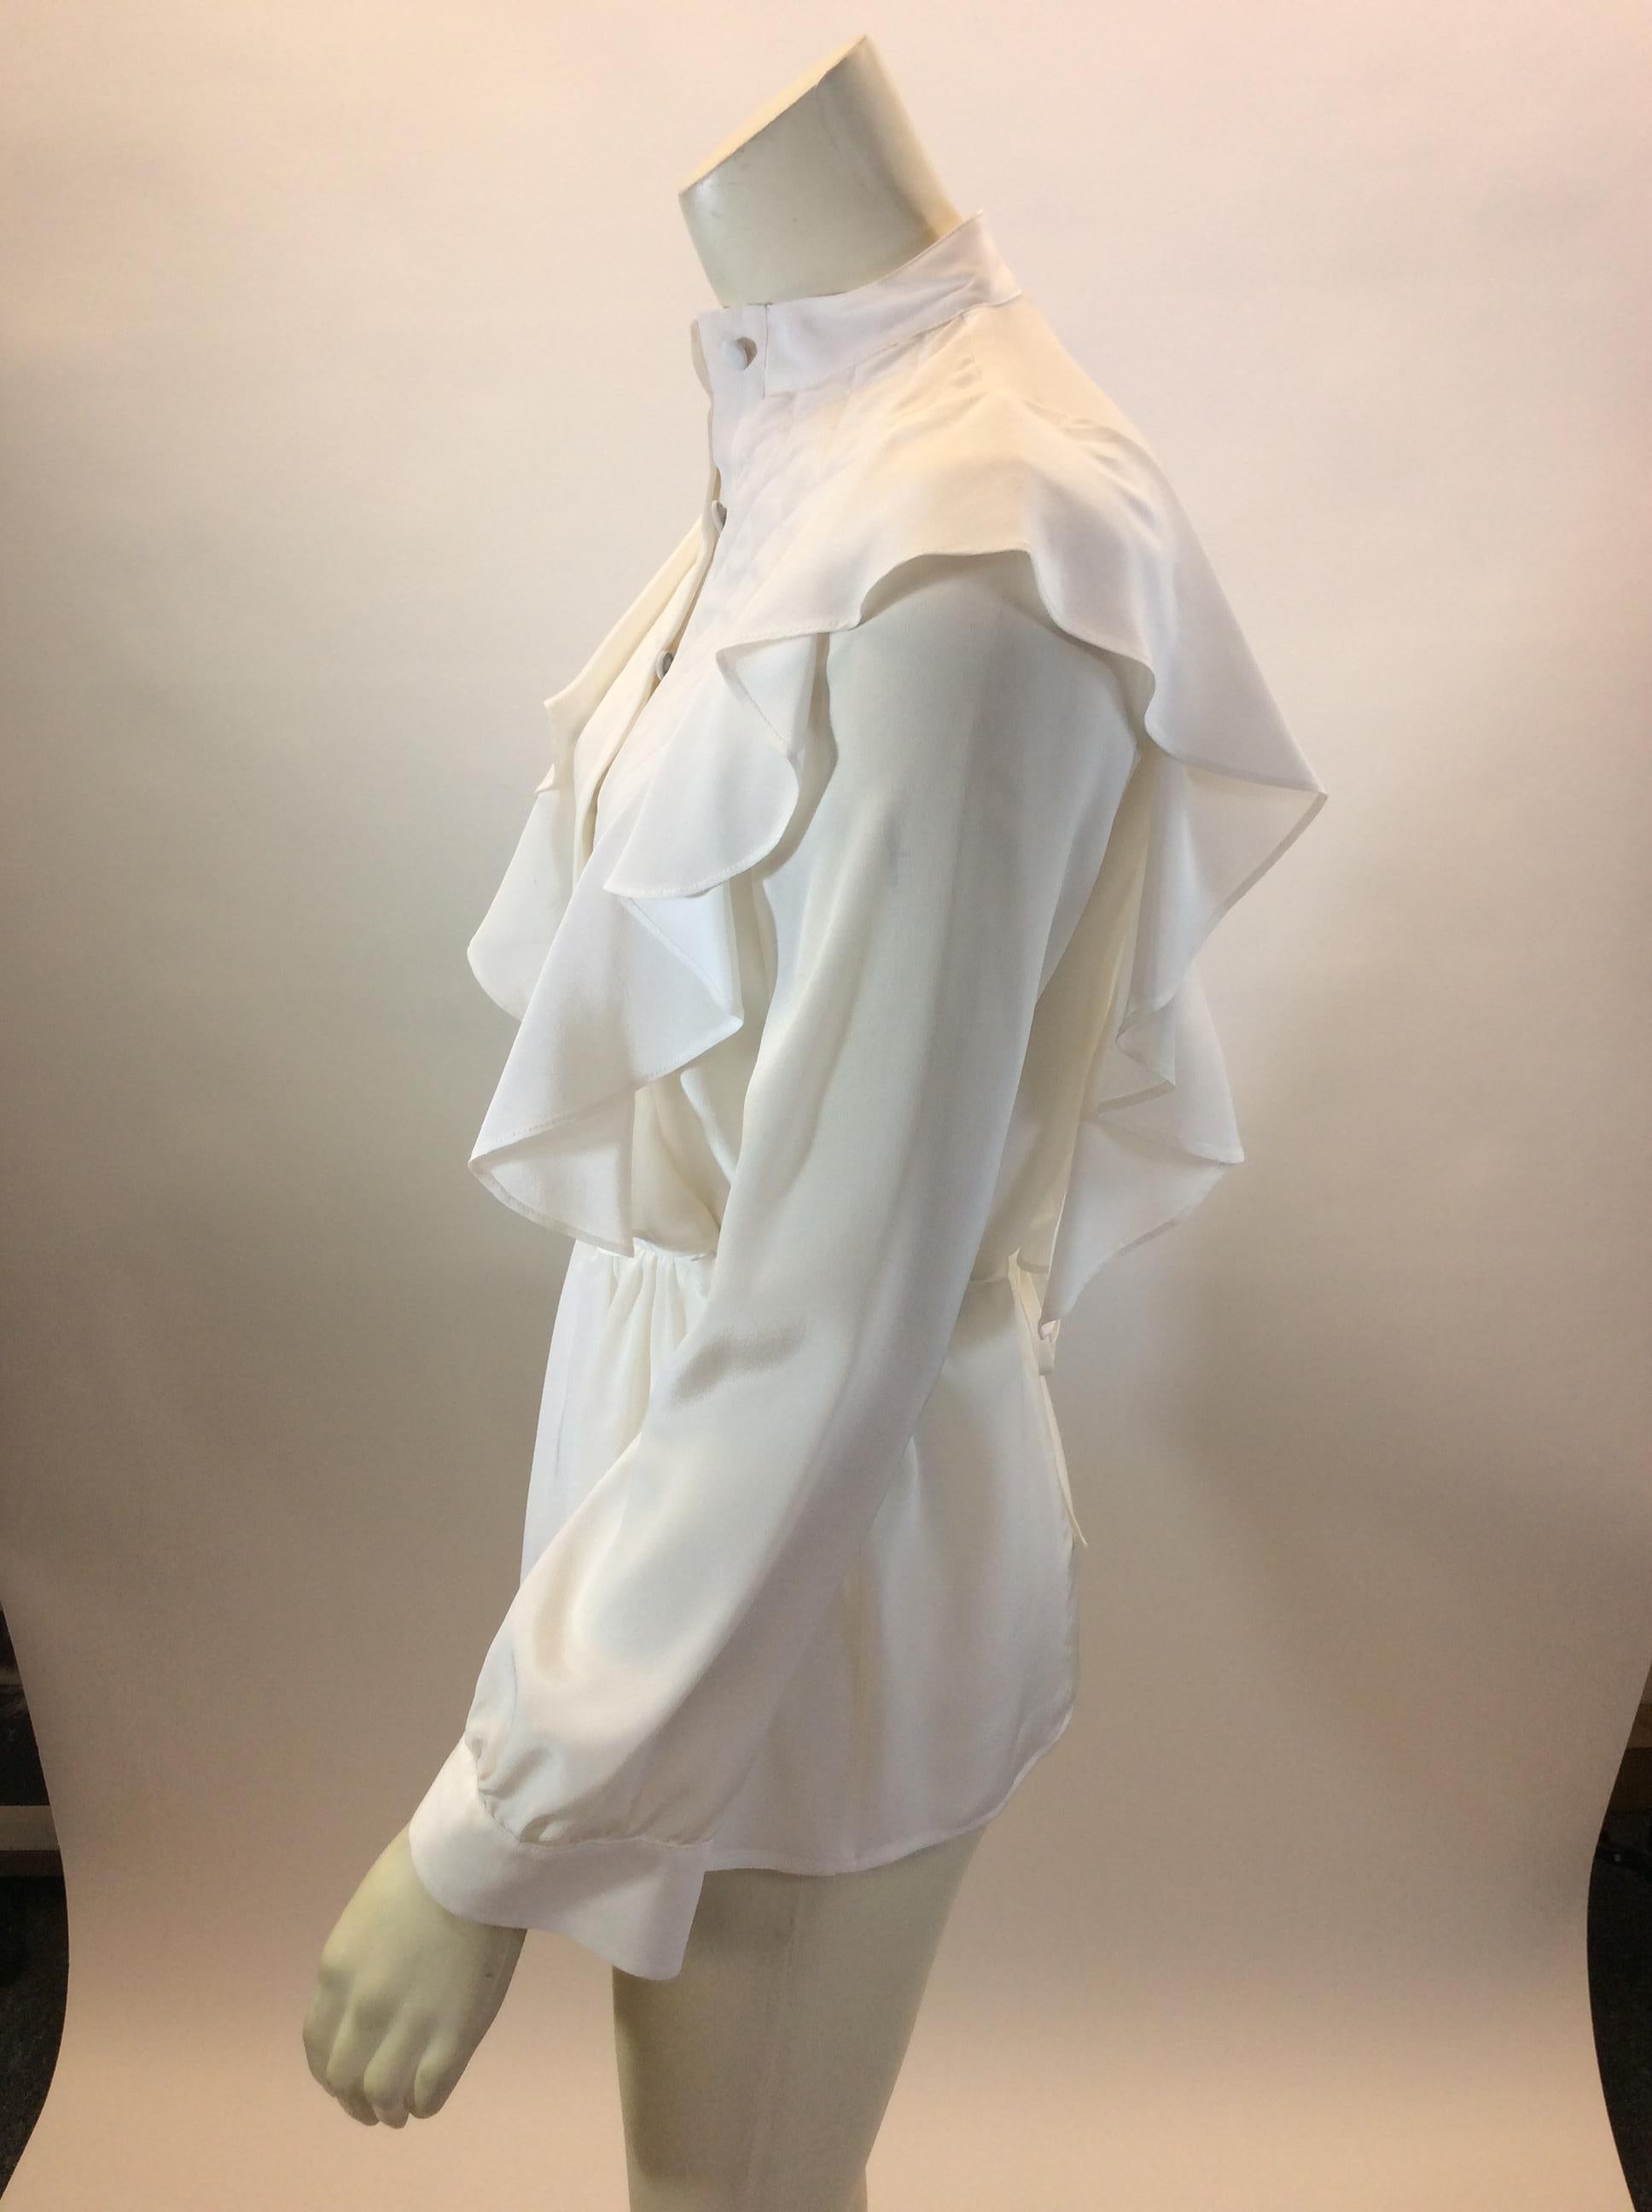 Givenchy White Silk Blouse
$199
Made in India
100% Silk
Size 36
Length 24.5